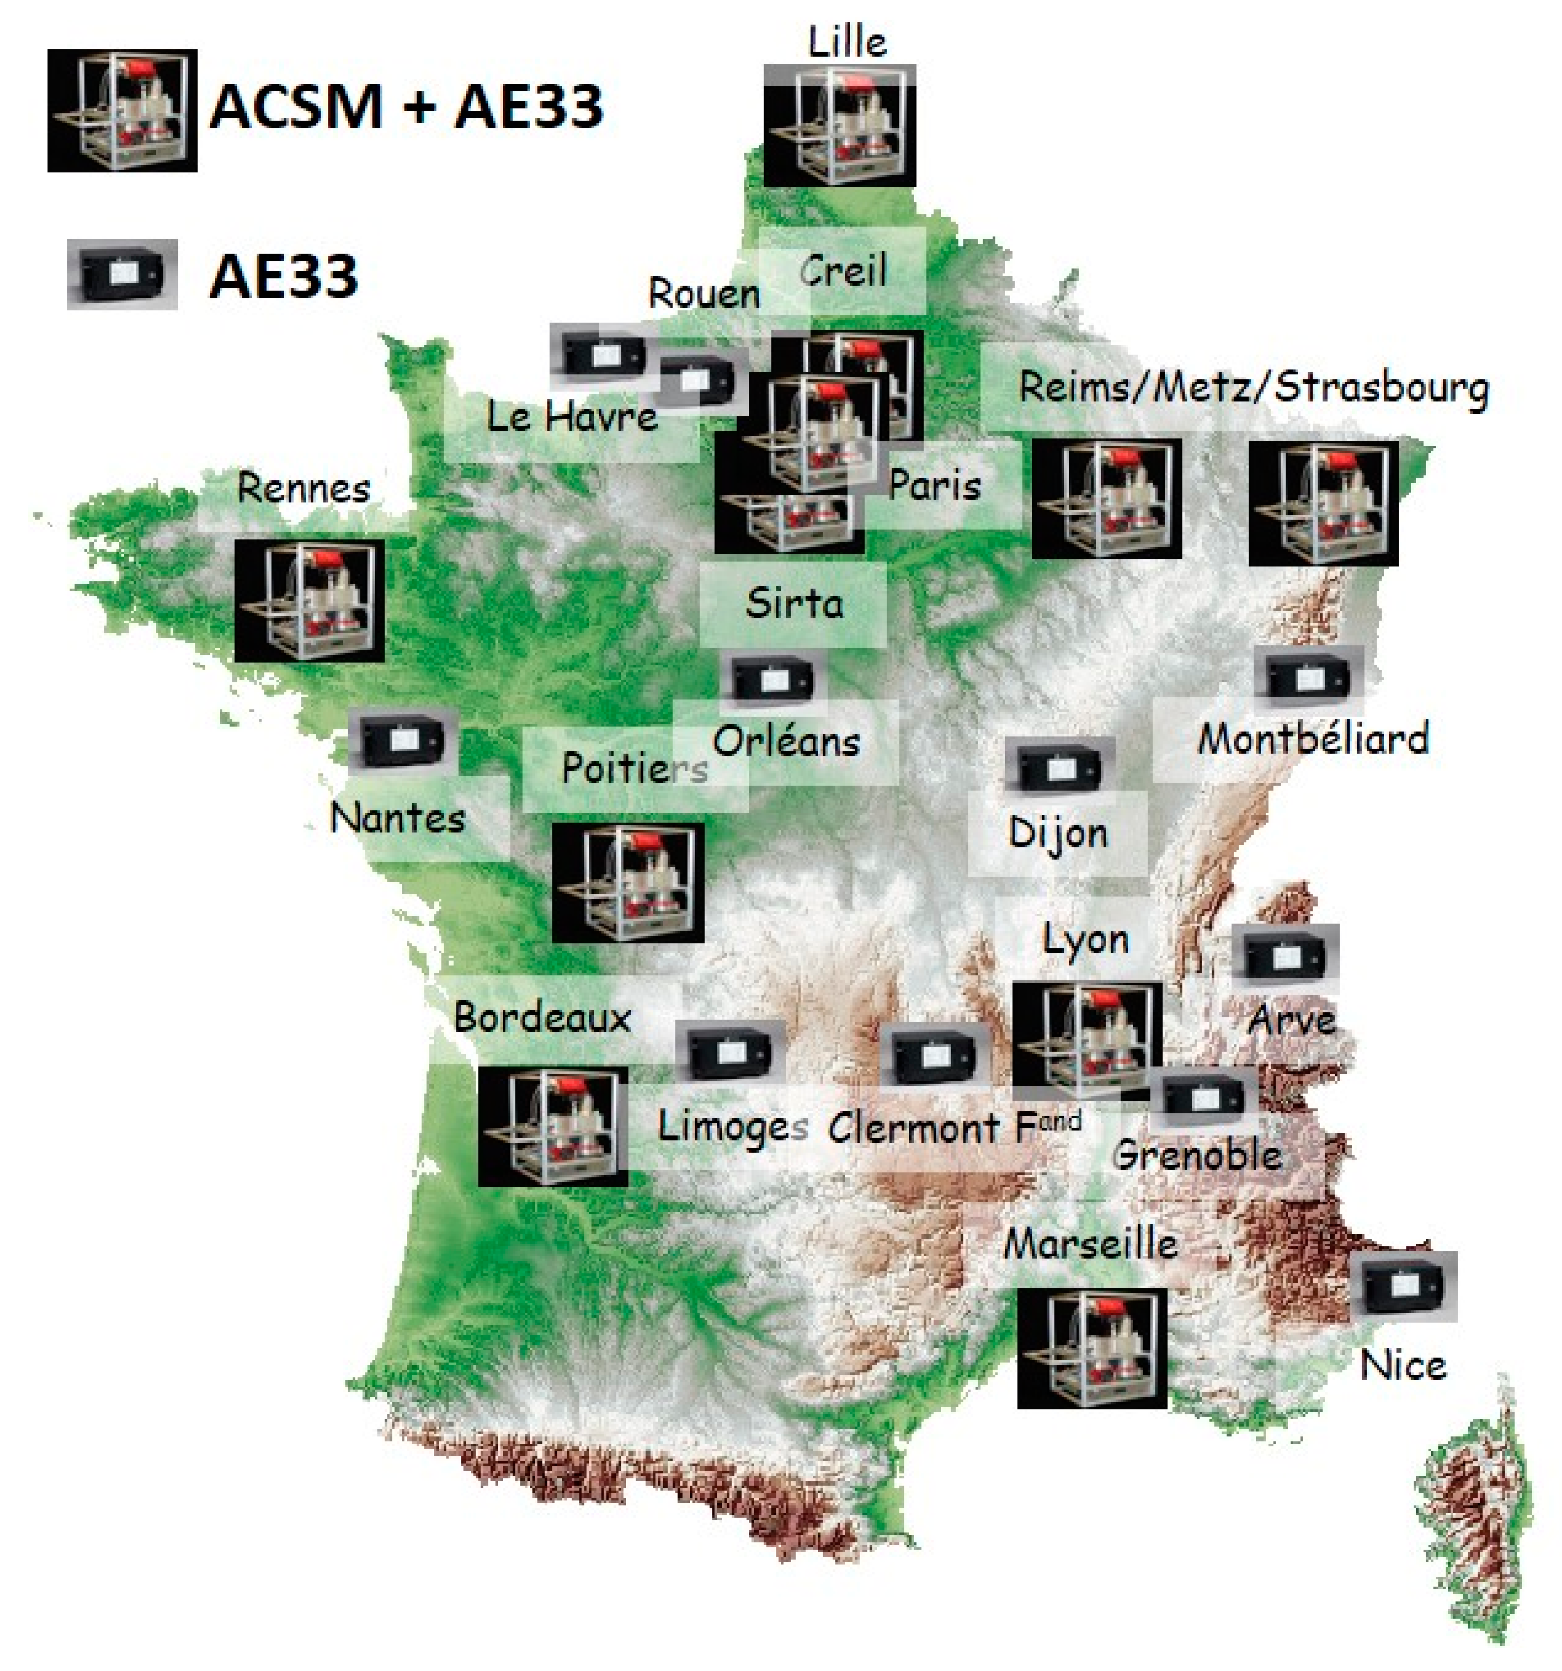 Atmosphere Free Full Text Overview Of The French Operational Network For In Situ Observation Of Pm Chemical Composition And Sources In Urban Environments Cara Program Html